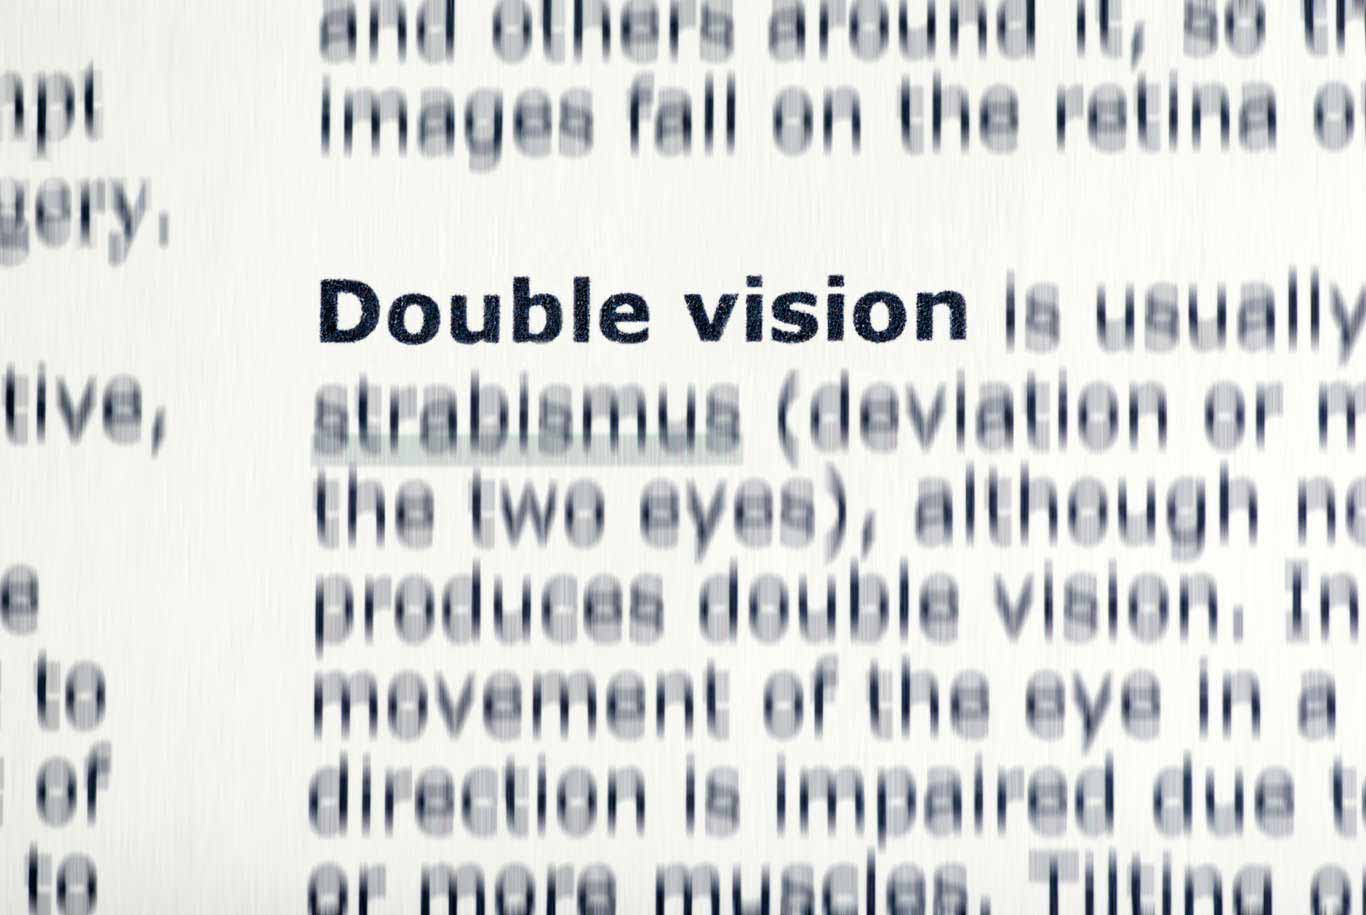 Strabismus - Stereo Optical